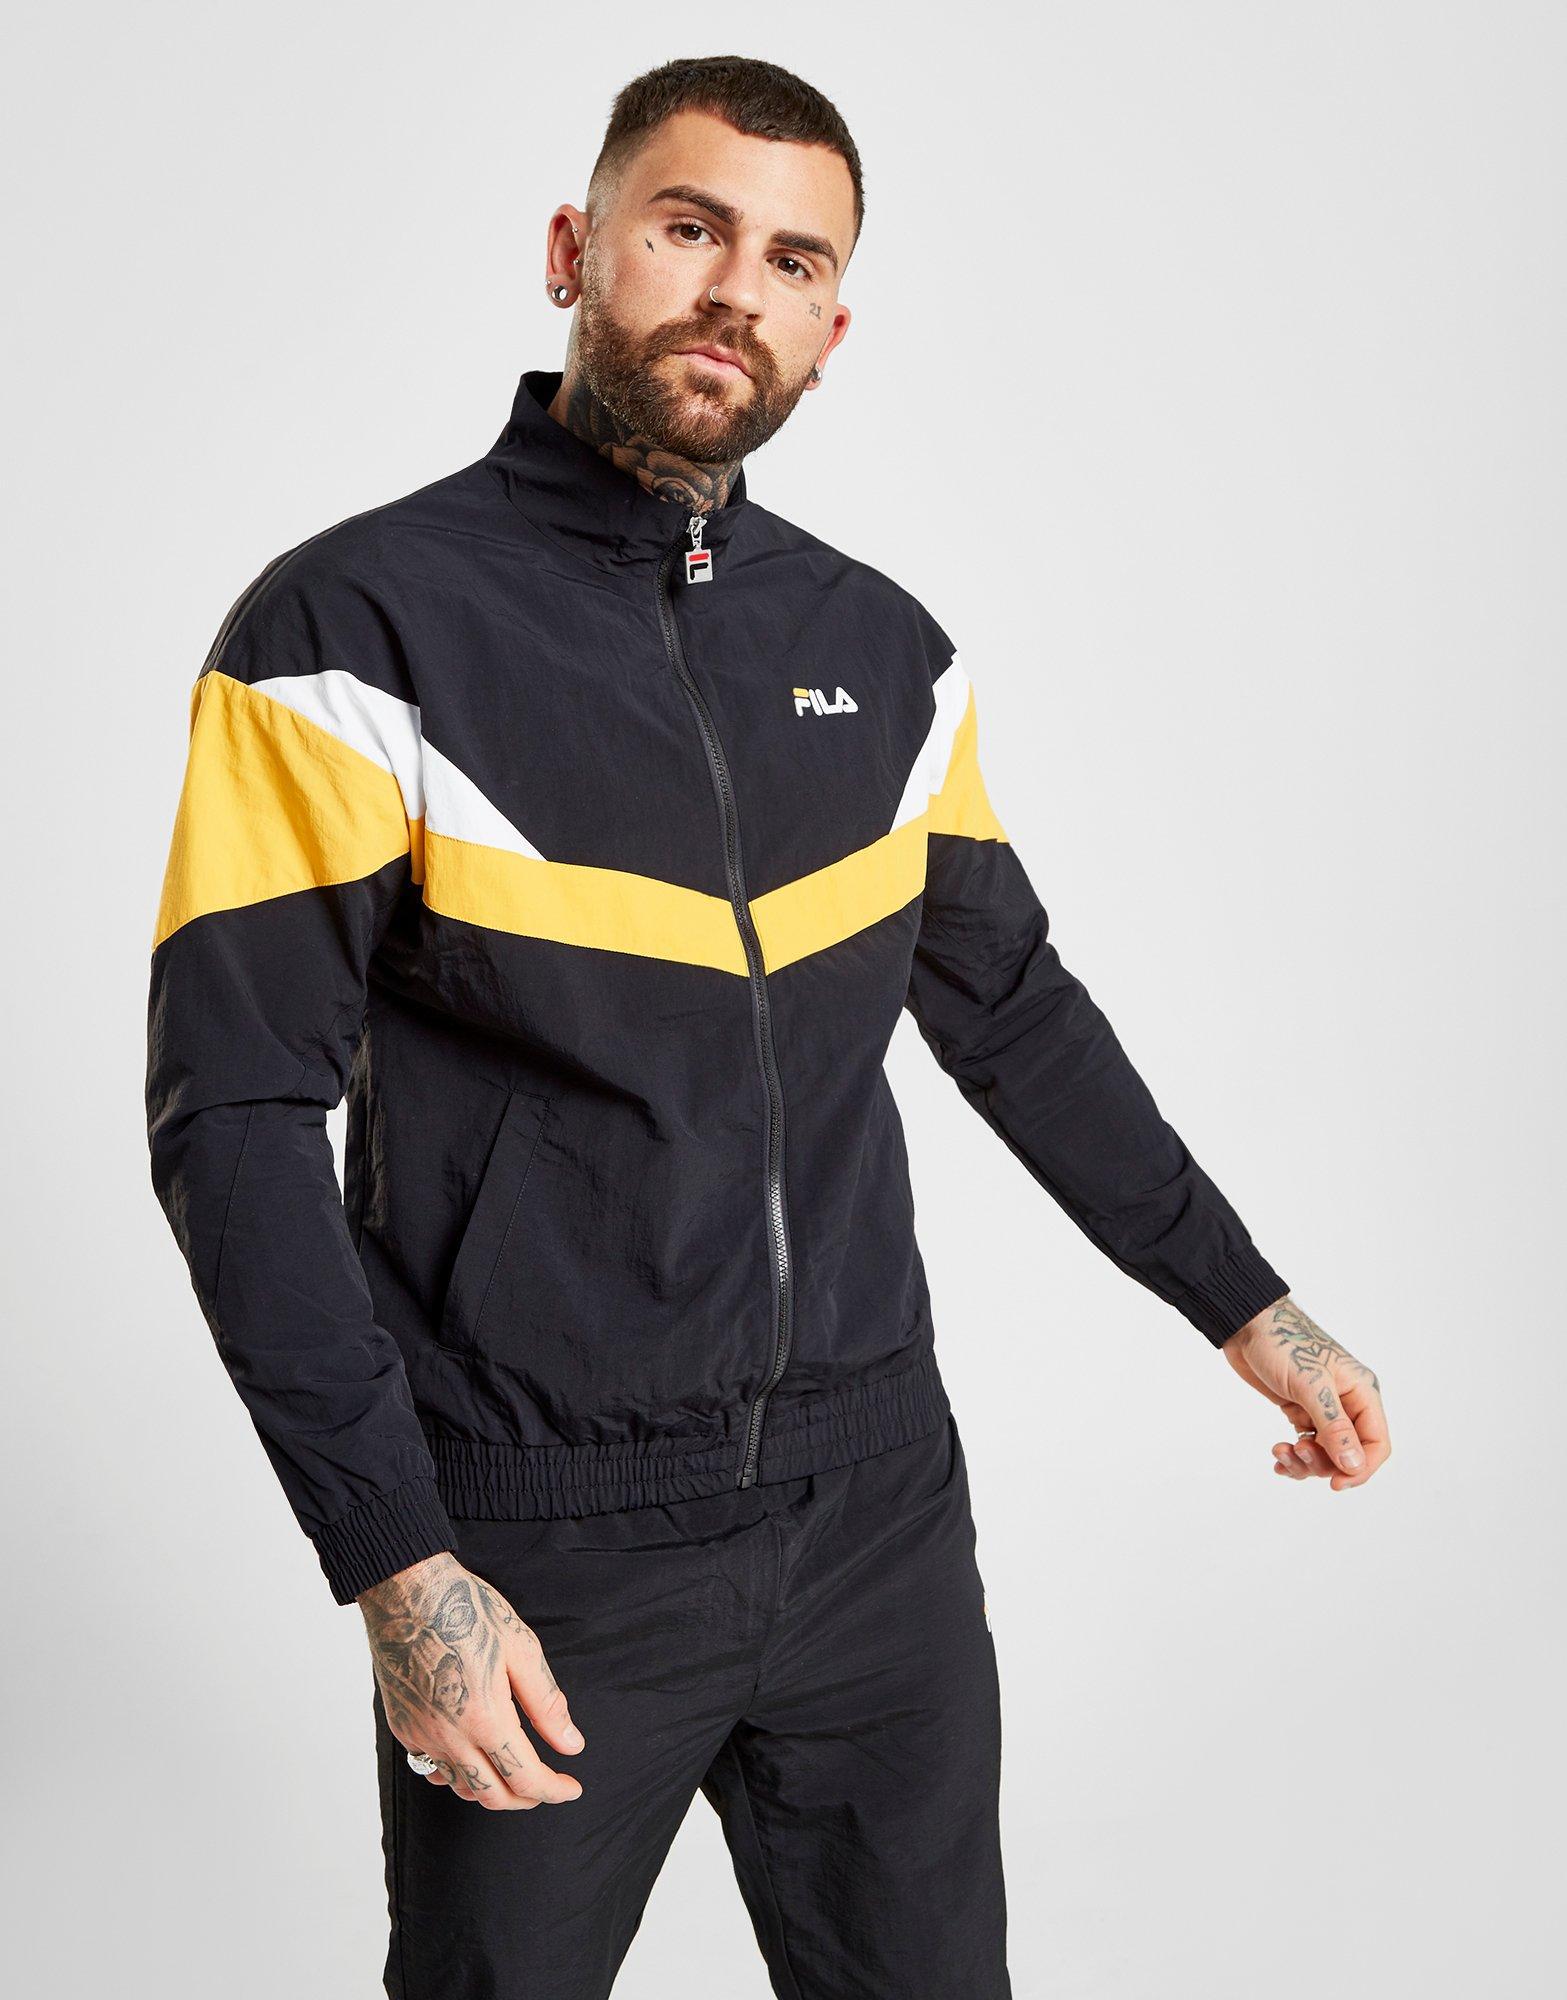 Fila Synthetic Griffin Woven Track Top in Black for Men - Lyst